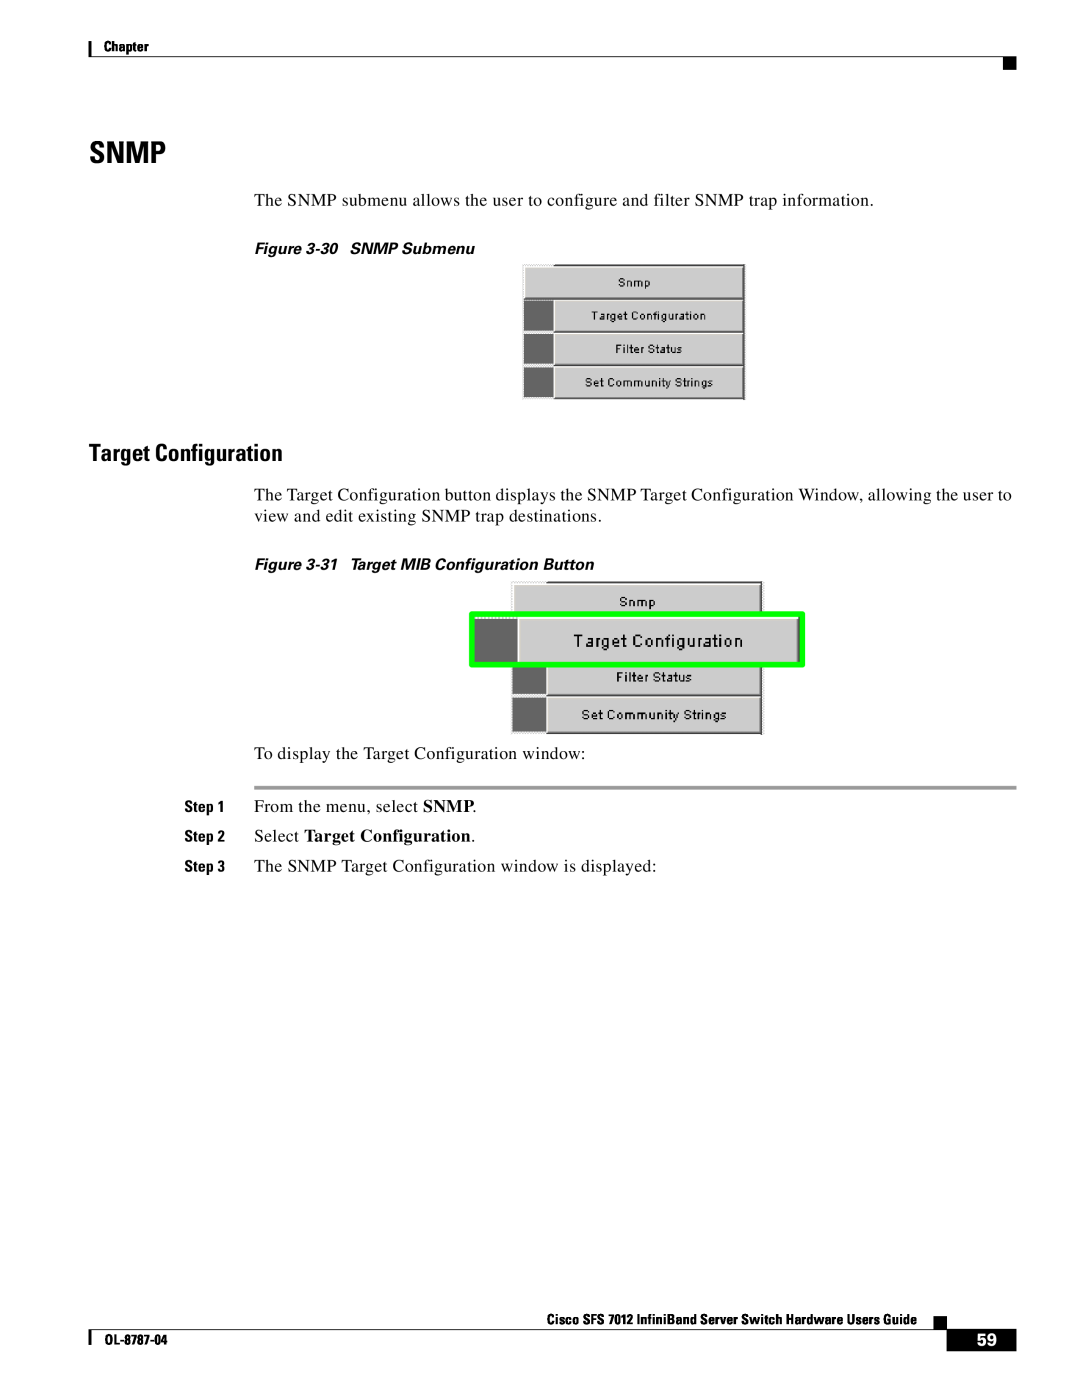 Cisco Systems SFS 7012 manual Snmp, Target Configuration 